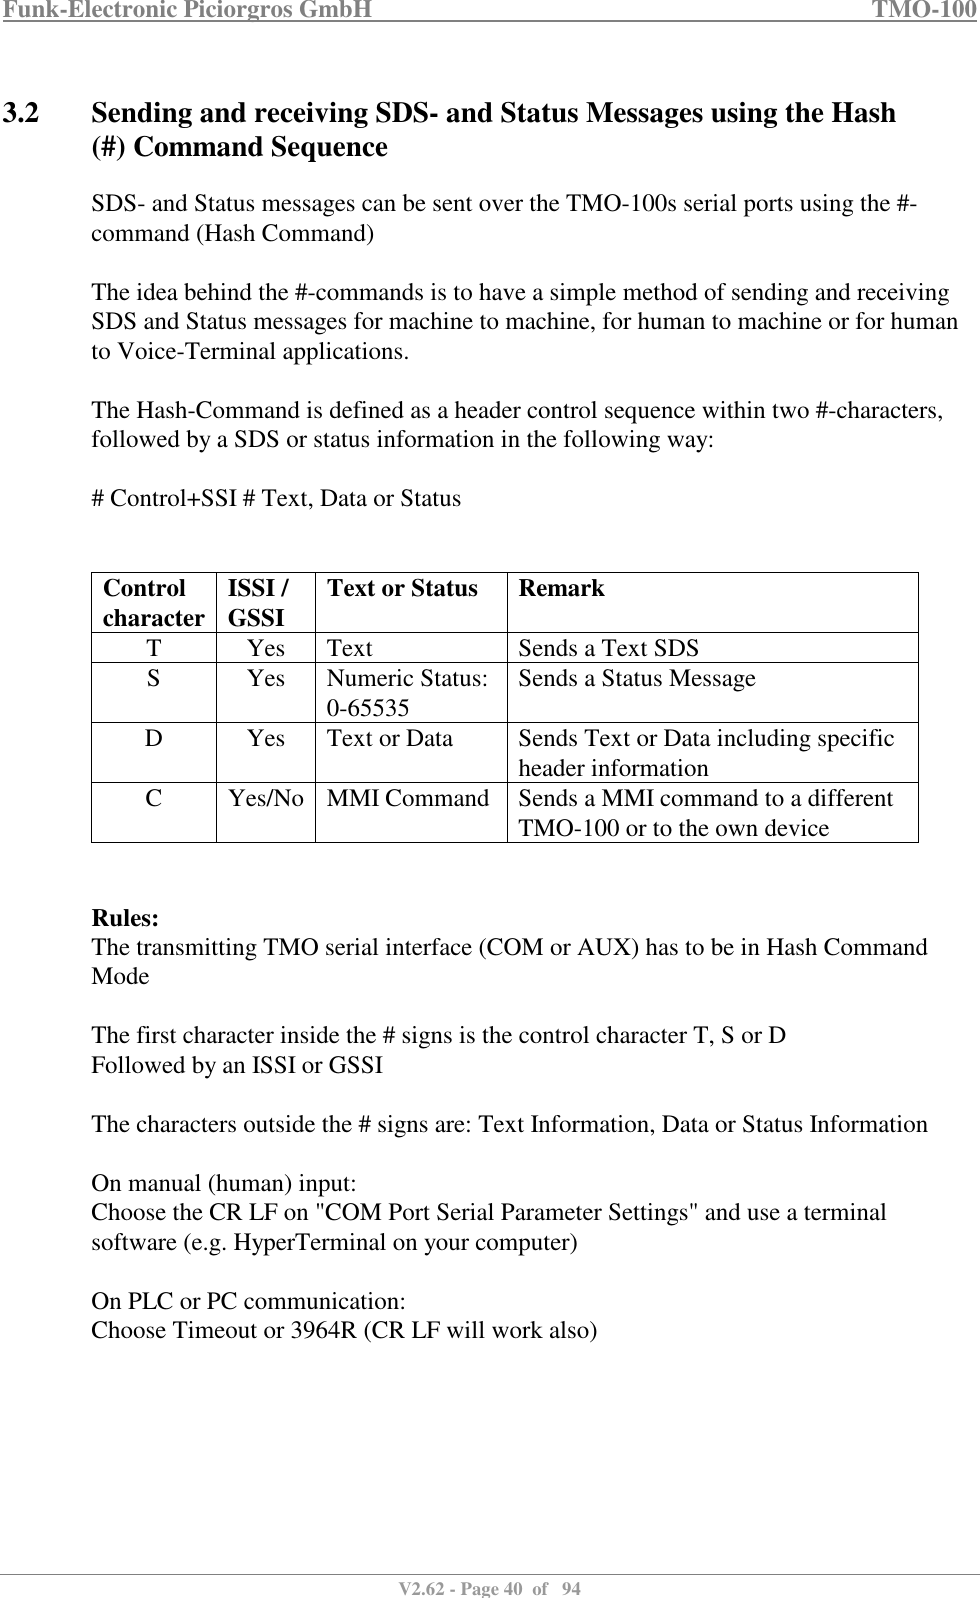 Funk-Electronic Piciorgros GmbH   TMO-100   V2.62 - Page 40  of   94   3.2 Sending and receiving SDS- and Status Messages using the Hash (#) Command Sequence SDS- and Status messages can be sent over the TMO-100s serial ports using the #-command (Hash Command)  The idea behind the #-commands is to have a simple method of sending and receiving SDS and Status messages for machine to machine, for human to machine or for human to Voice-Terminal applications.  The Hash-Command is defined as a header control sequence within two #-characters, followed by a SDS or status information in the following way:  # Control+SSI # Text, Data or Status   Control  character ISSI / GSSI  Text or Status  Remark T  Yes  Text  Sends a Text SDS S  Yes  Numeric Status: 0-65535  Sends a Status Message D  Yes  Text or Data  Sends Text or Data including specific header information C  Yes/No MMI Command  Sends a MMI command to a different TMO-100 or to the own device   Rules: The transmitting TMO serial interface (COM or AUX) has to be in Hash Command Mode  The first character inside the # signs is the control character T, S or D Followed by an ISSI or GSSI  The characters outside the # signs are: Text Information, Data or Status Information  On manual (human) input:  Choose the CR LF on &quot;COM Port Serial Parameter Settings&quot; and use a terminal software (e.g. HyperTerminal on your computer)  On PLC or PC communication:  Choose Timeout or 3964R (CR LF will work also)  